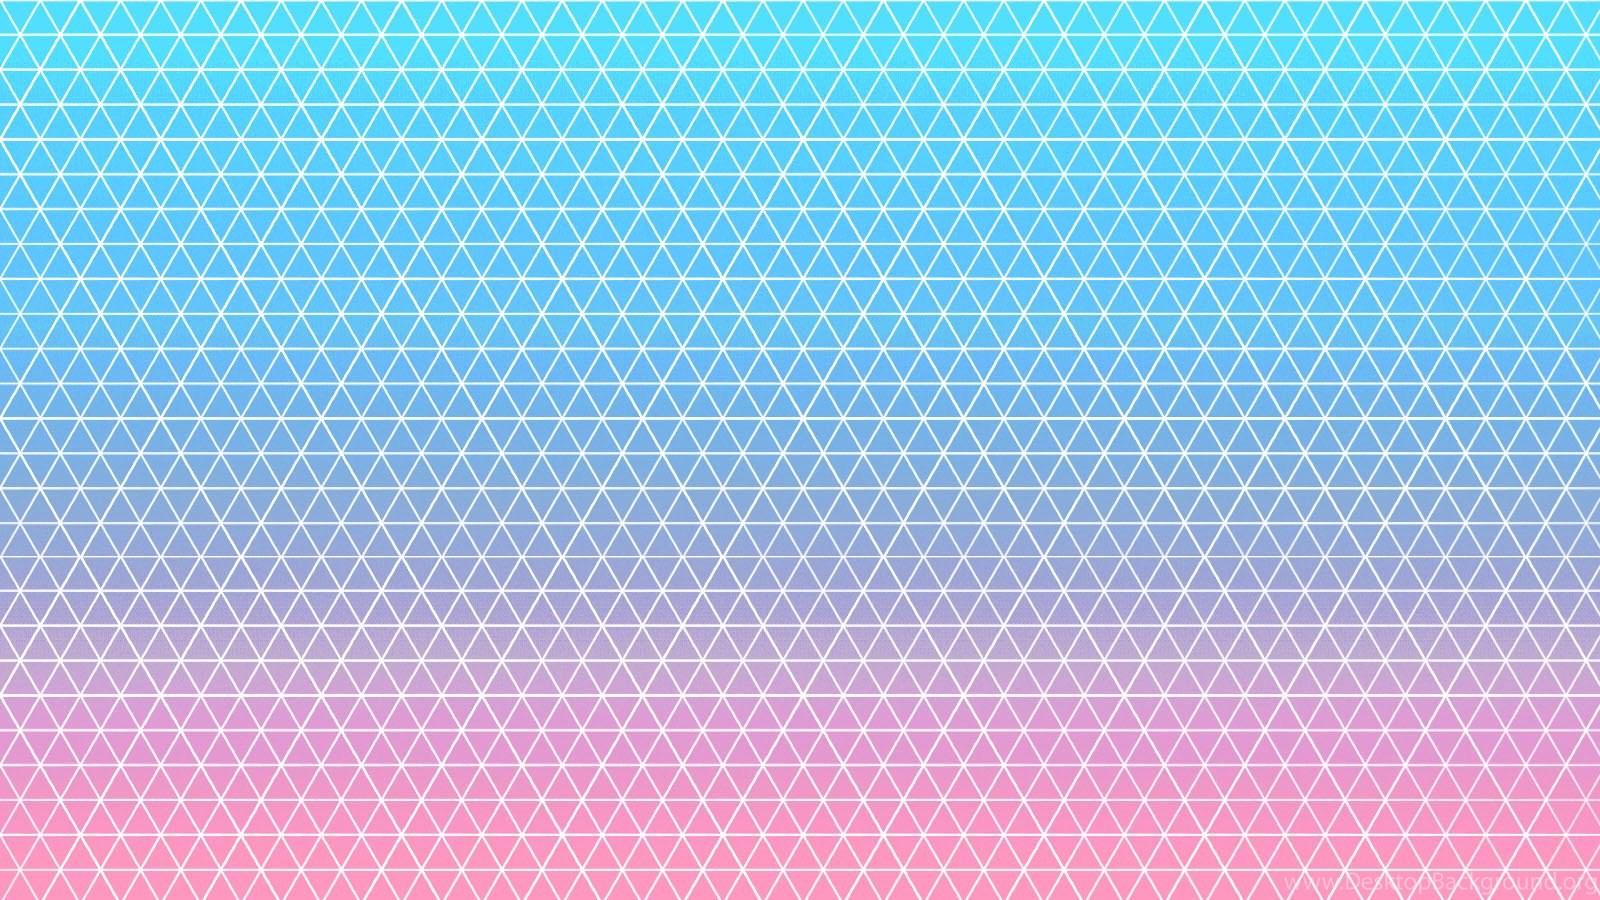 Pink and Blue Minimalist Wallpapers - Top Free Pink and Blue Minimalist ...